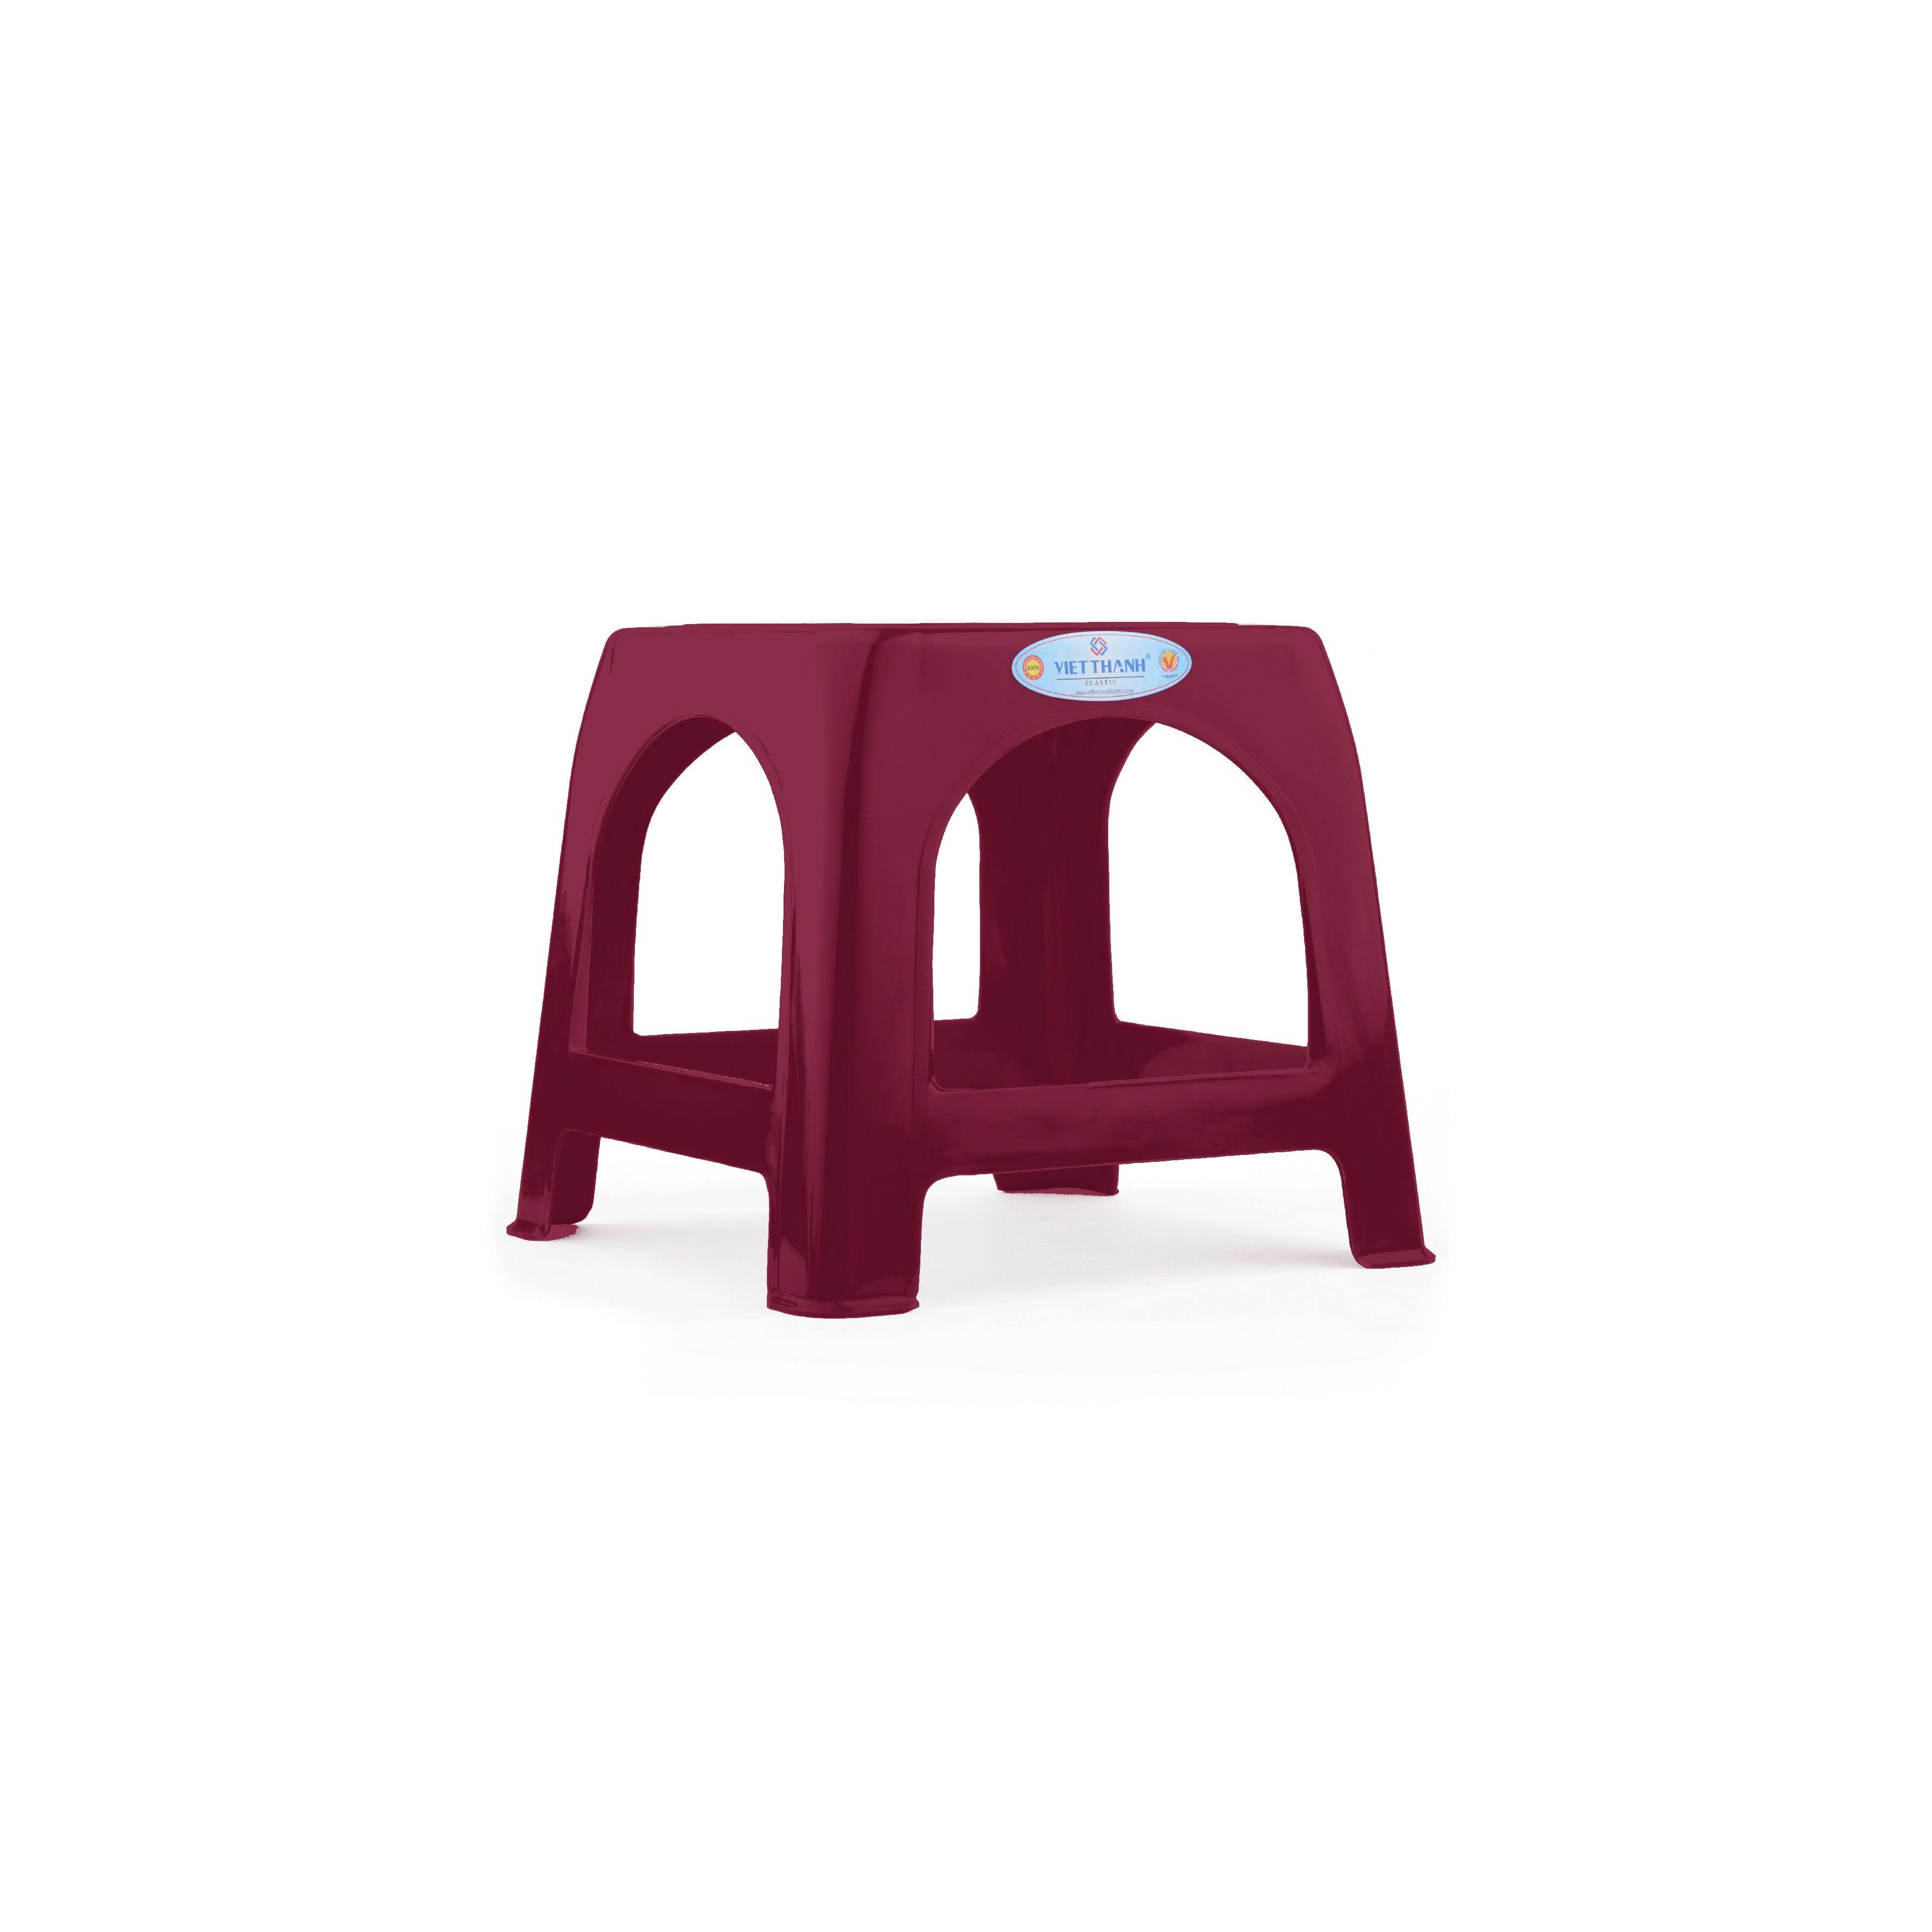 a set of maroon stools = 2 of 4